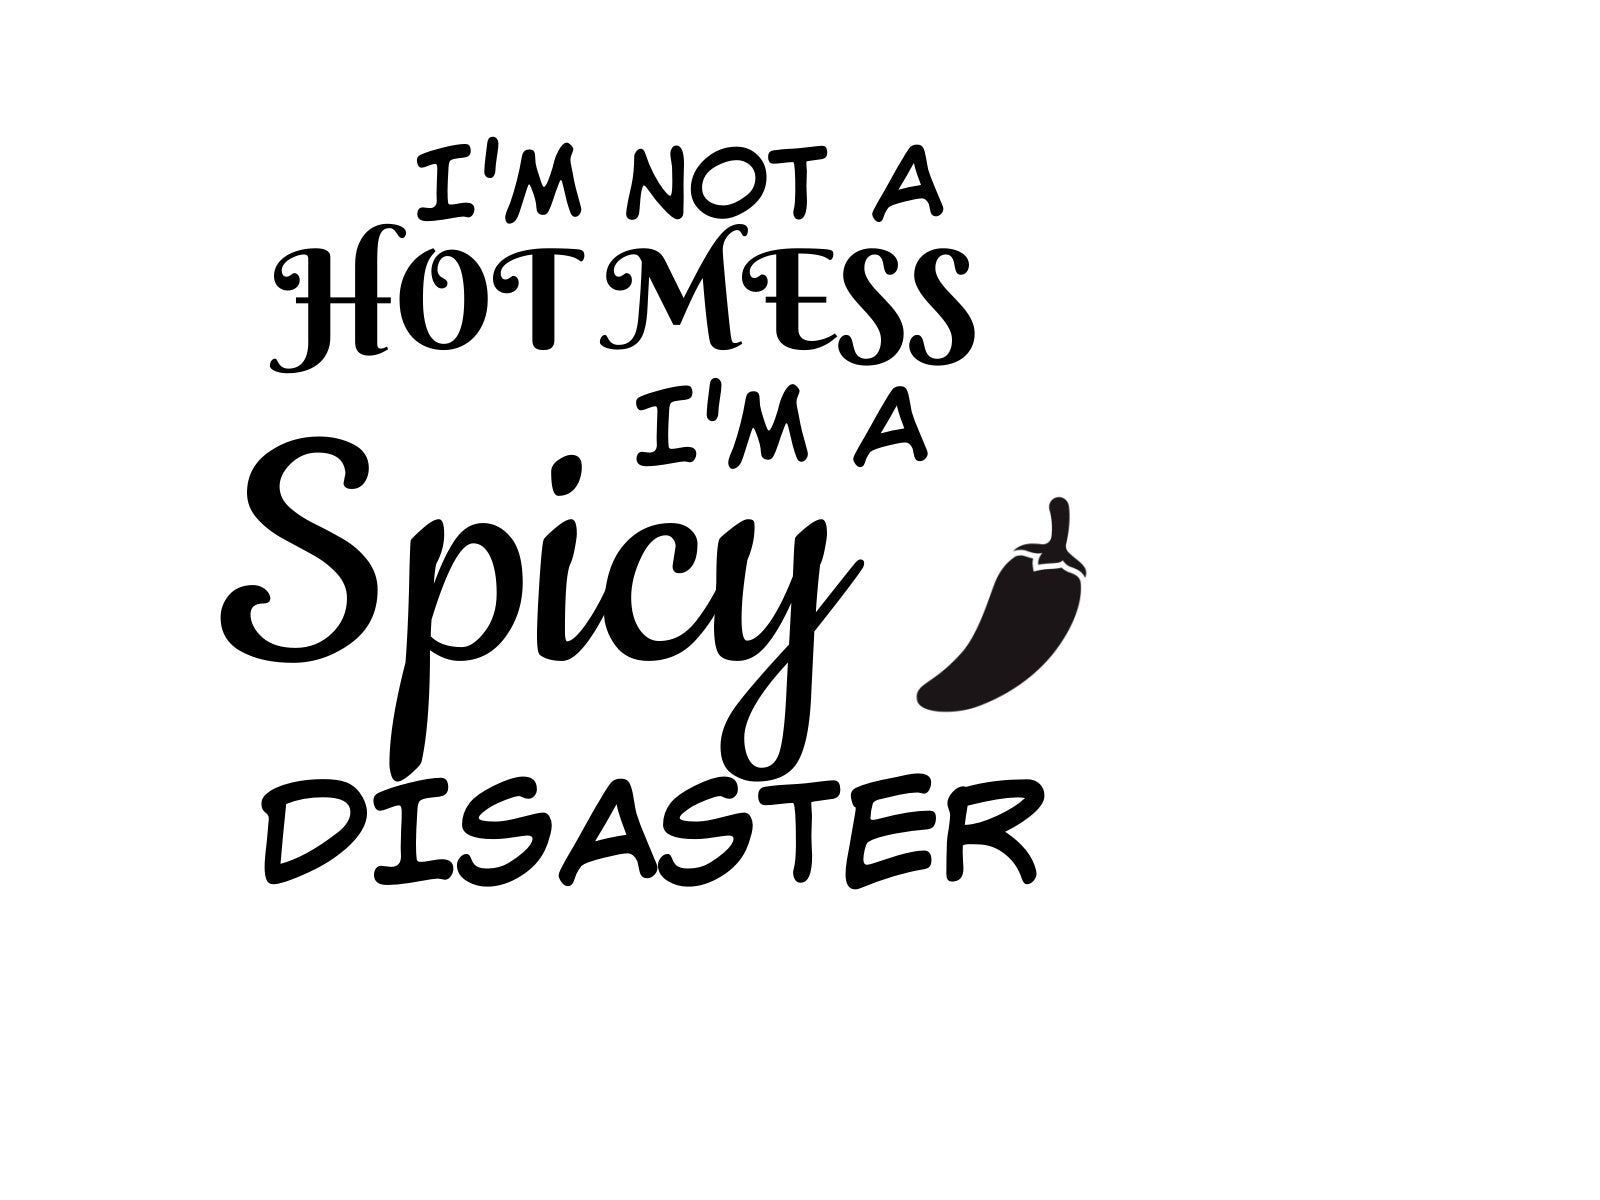 I'm Not a Hot Mess. I'm A Spicy Disaster